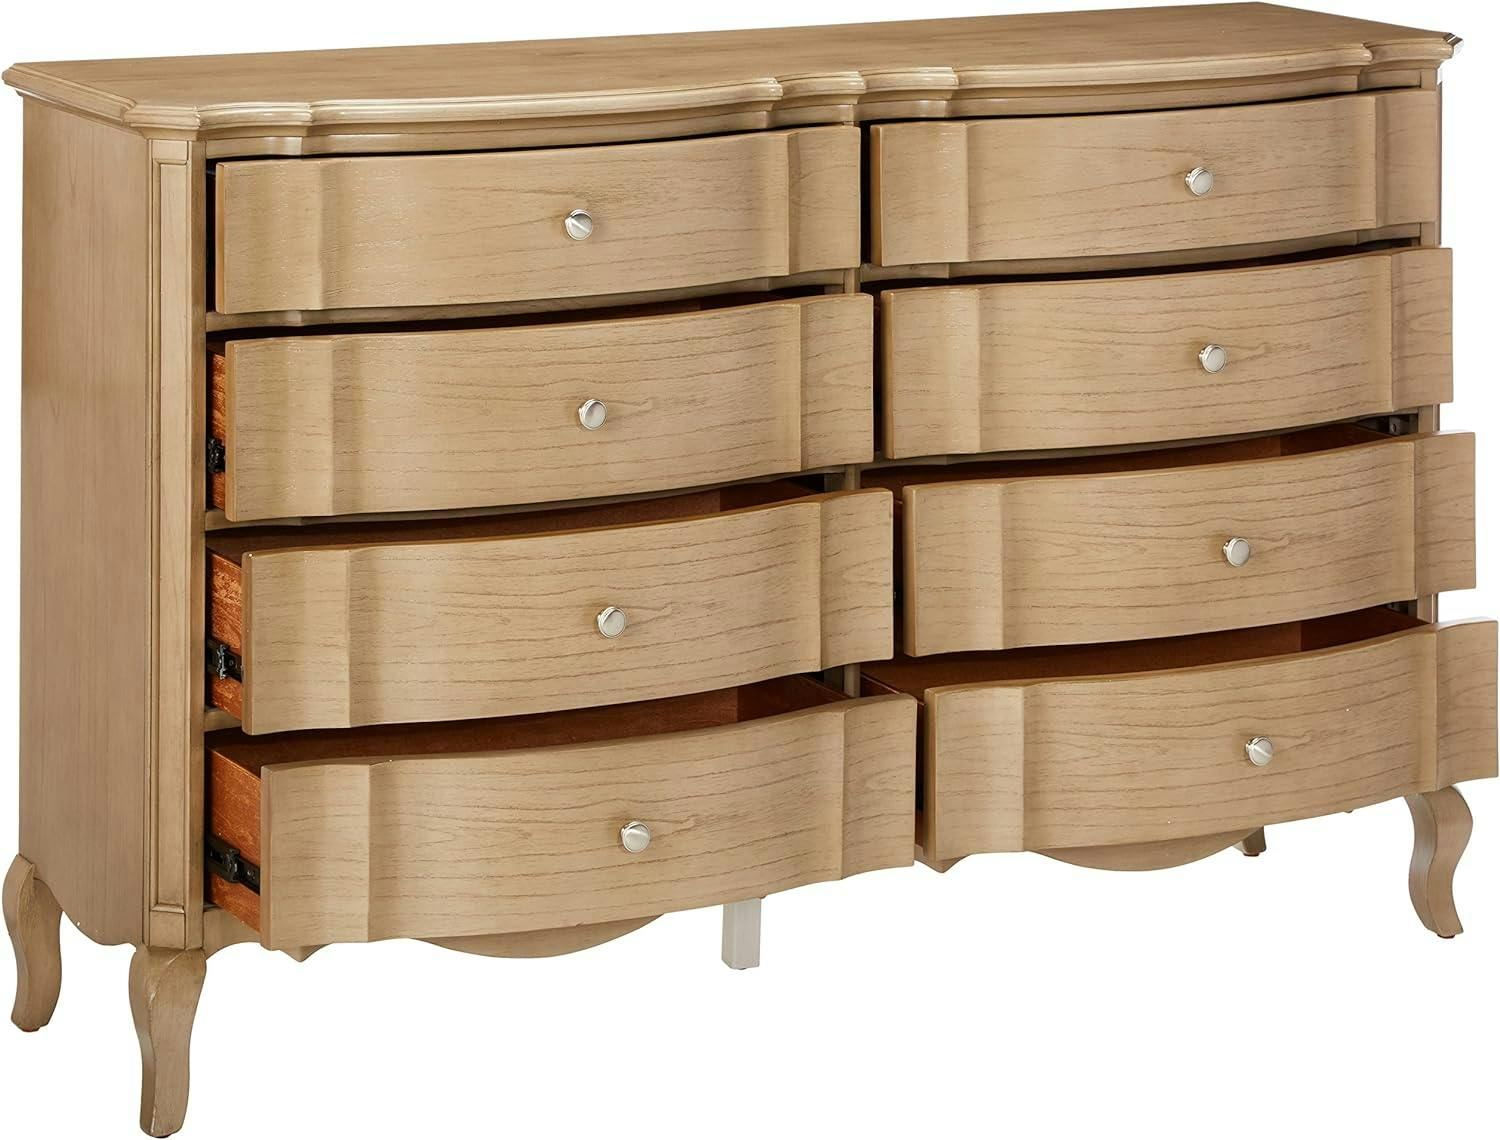 Elegant Antique Taupe Dresser with Dovetail and Felt-Lined Drawers